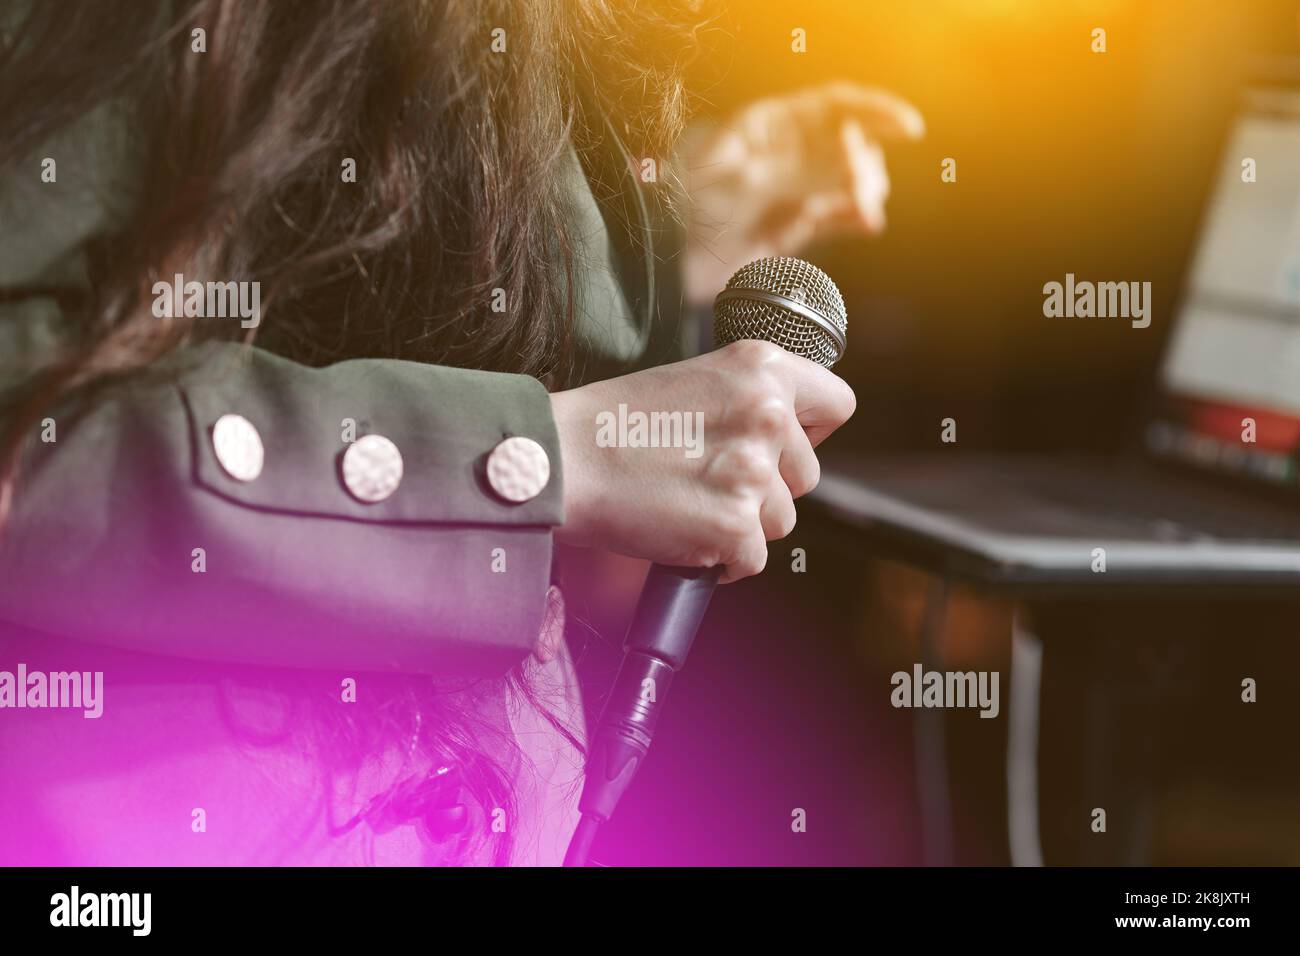 close up female hand holding microphone on music hall. cropped image of female singer in green jacket, holding mic Stock Photo